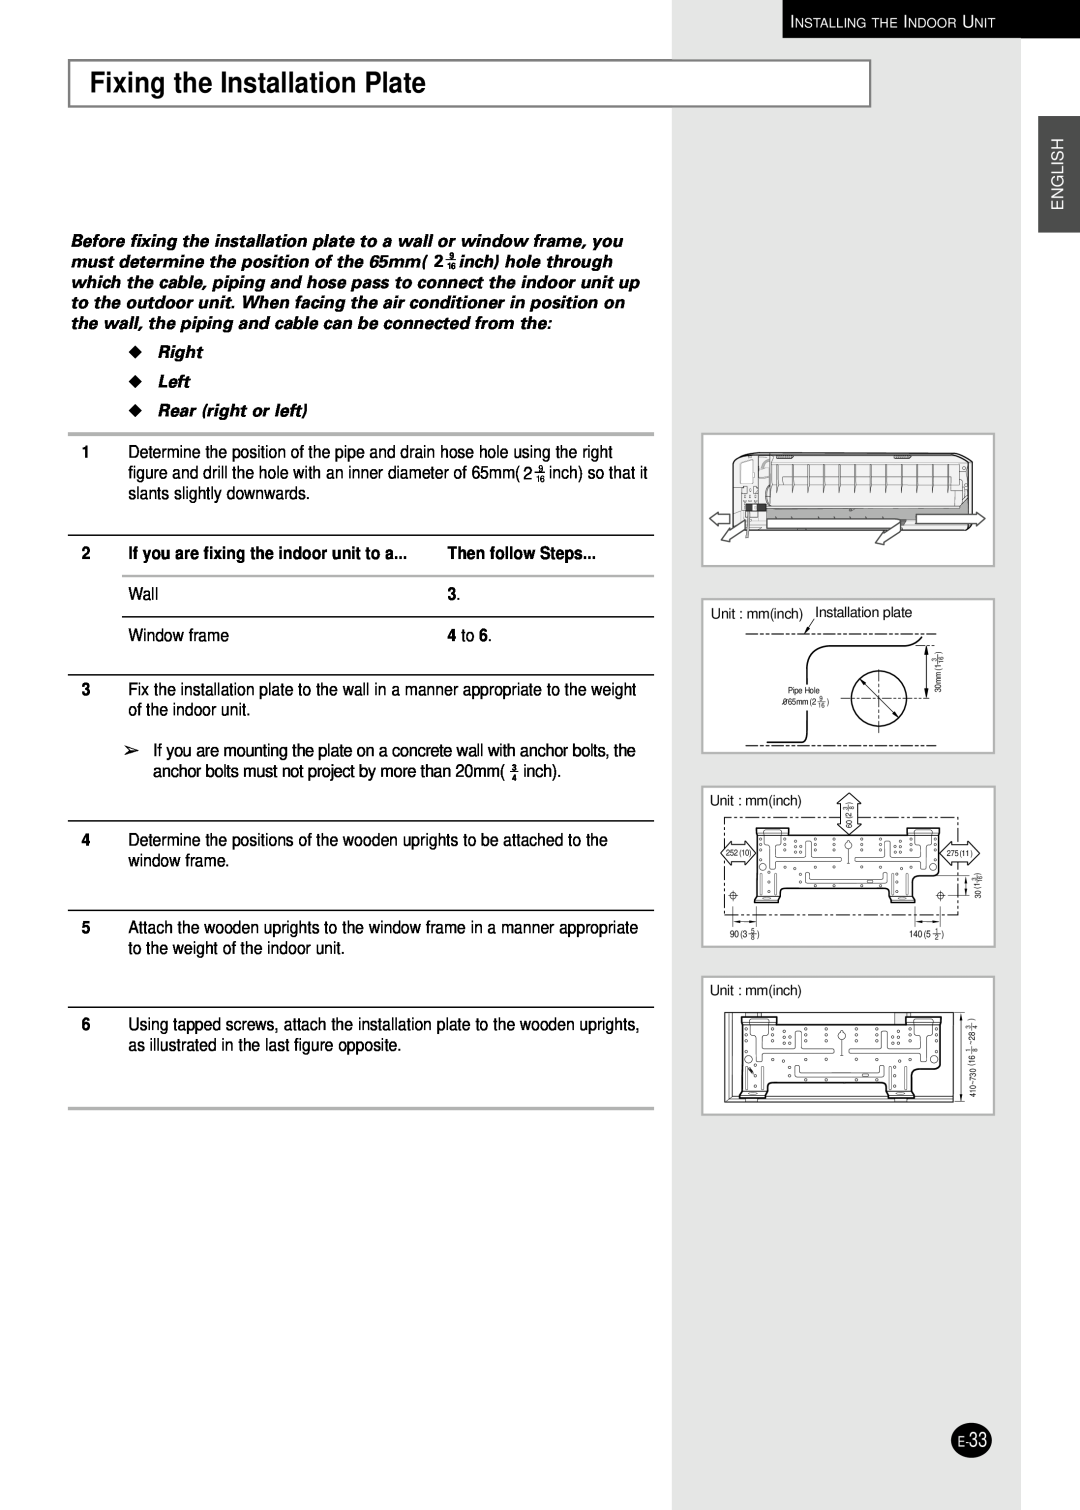 Samsung AM27B1C13 Fixing the Installation Plate, Right Left Rear right or left, Then follow Steps, Wall, Window frame 